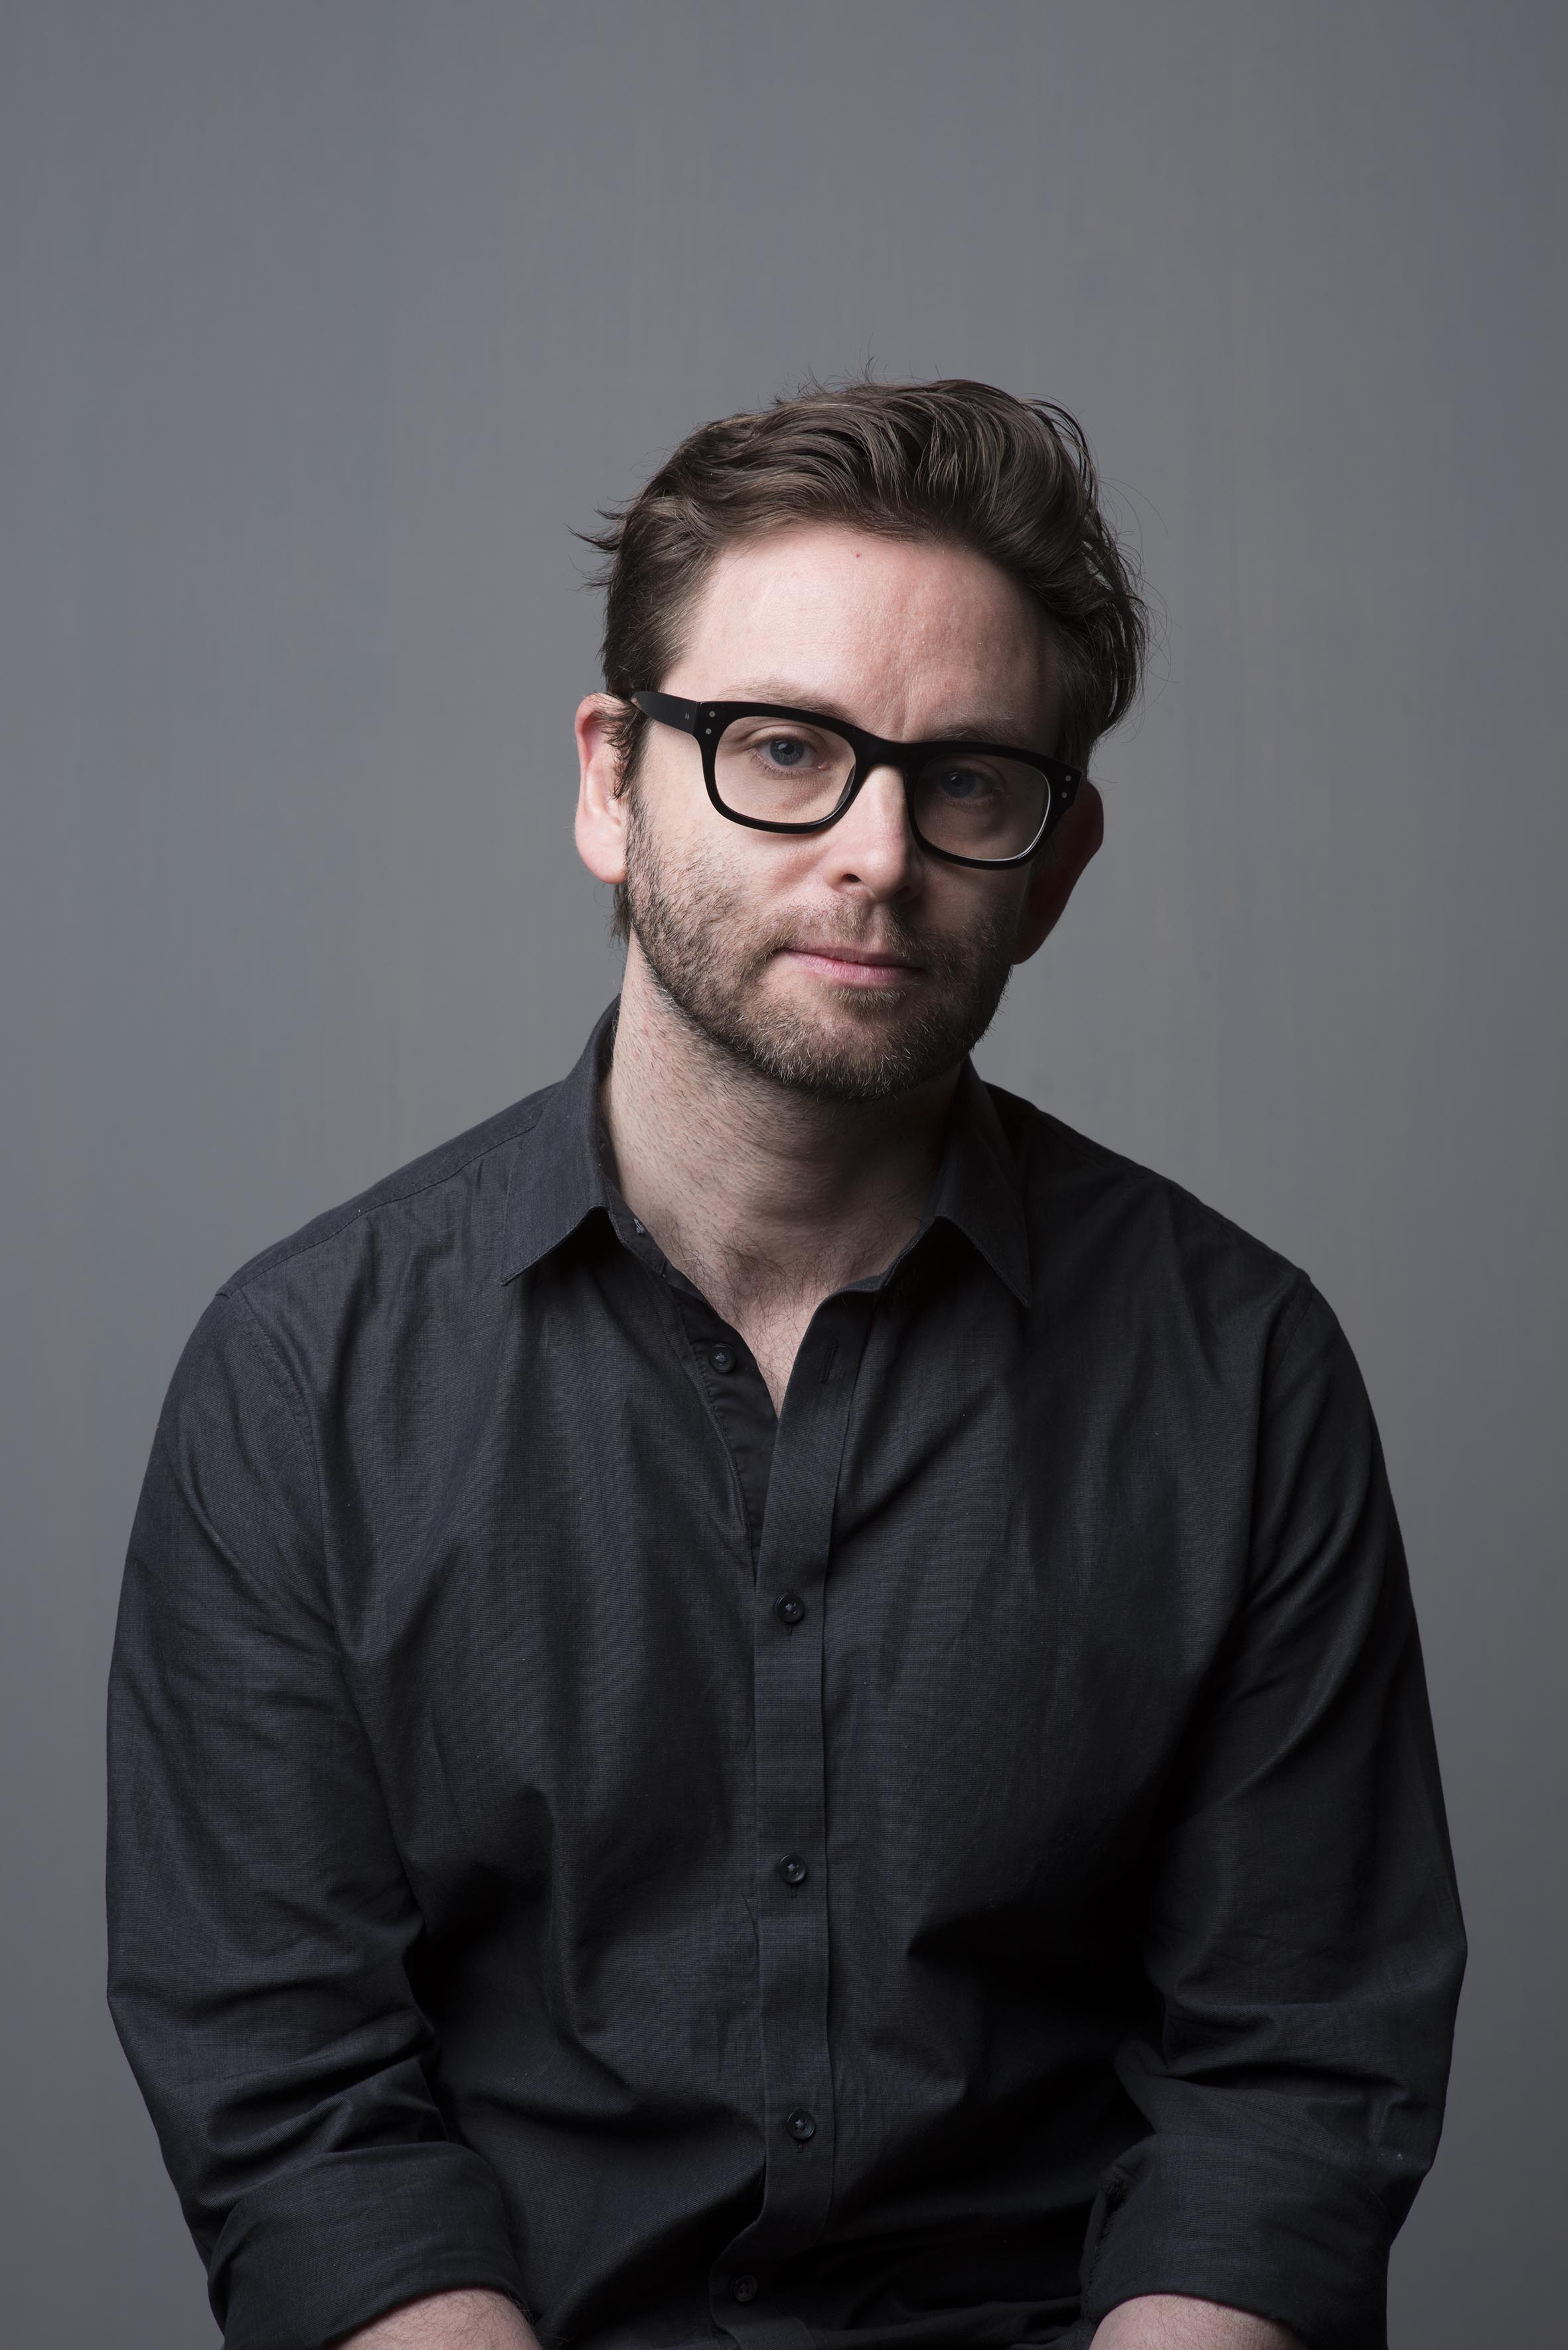 A 40-something man with thick black glasses looks into the camera. He has a beard and is wearing a black button-up shirt.